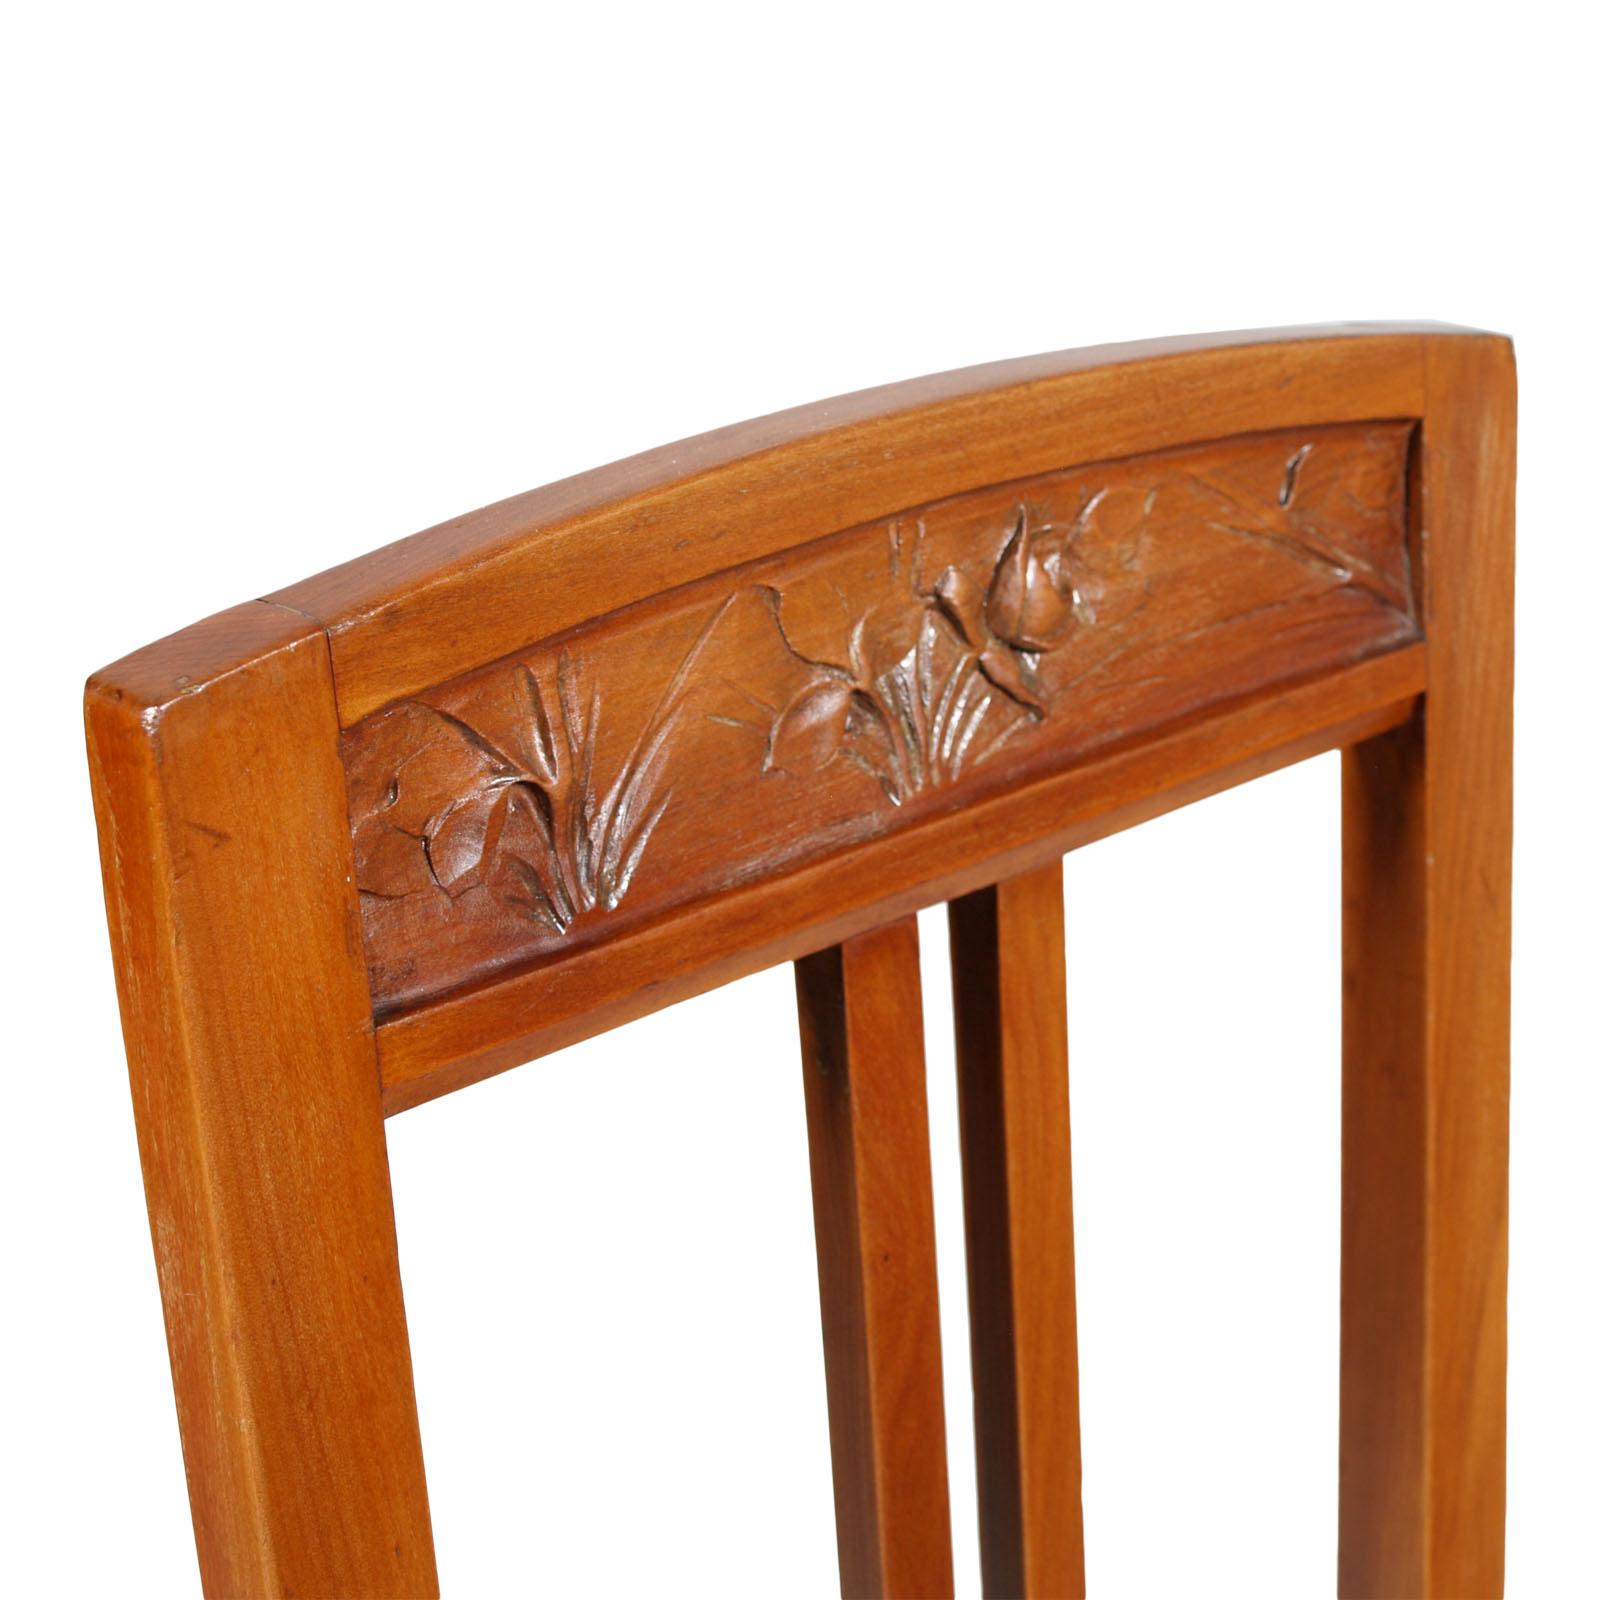 20th Century Italian Art Nouveau Side Chairs with Stool, Blond Walnut, Wax-Polished For Sale